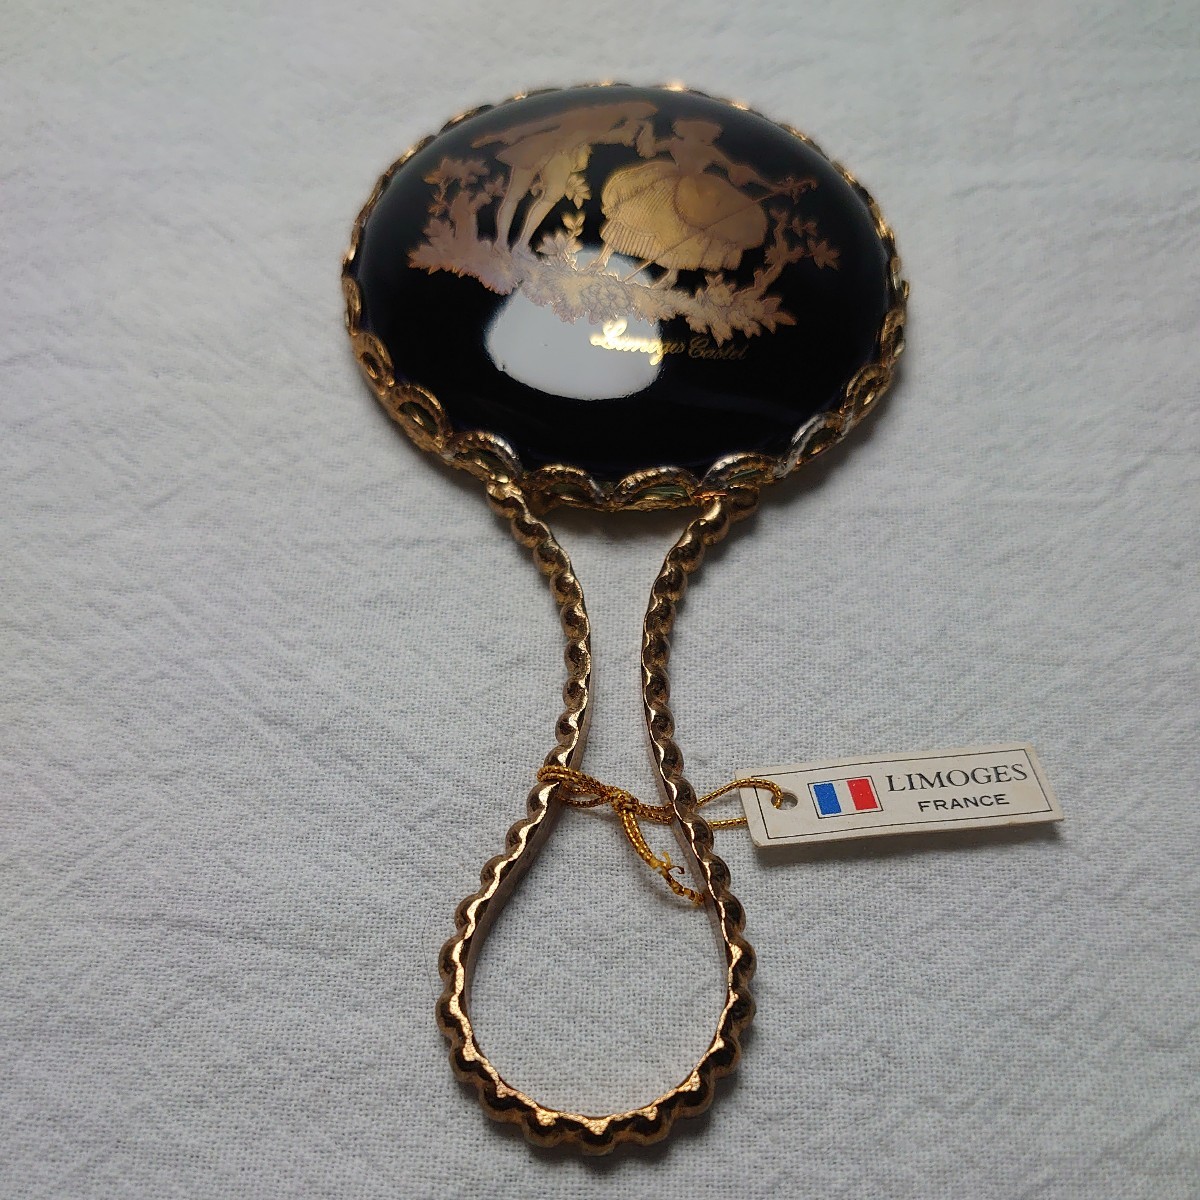  Limo -juLIMOGES CASTEL France made hand-mirror antique hand mirror retro 